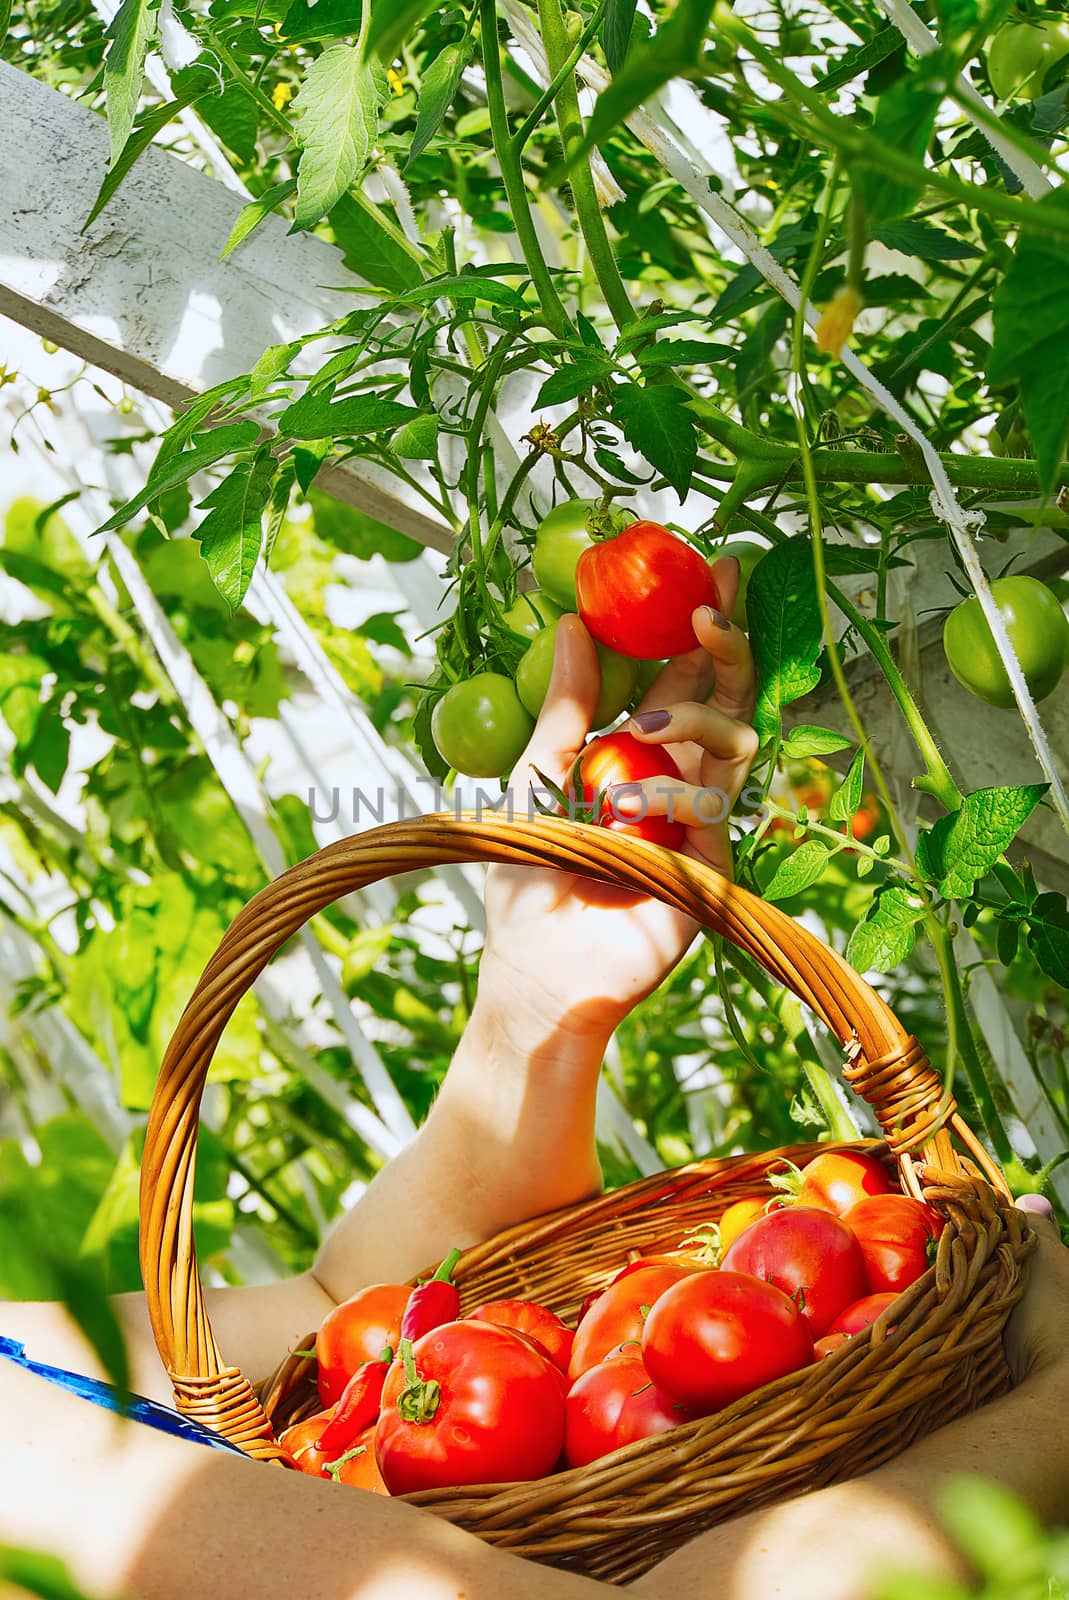 in the greenhouse the woman hand collects ripe red ecological tomatoes into a wicker basket. eco food home gardening concept